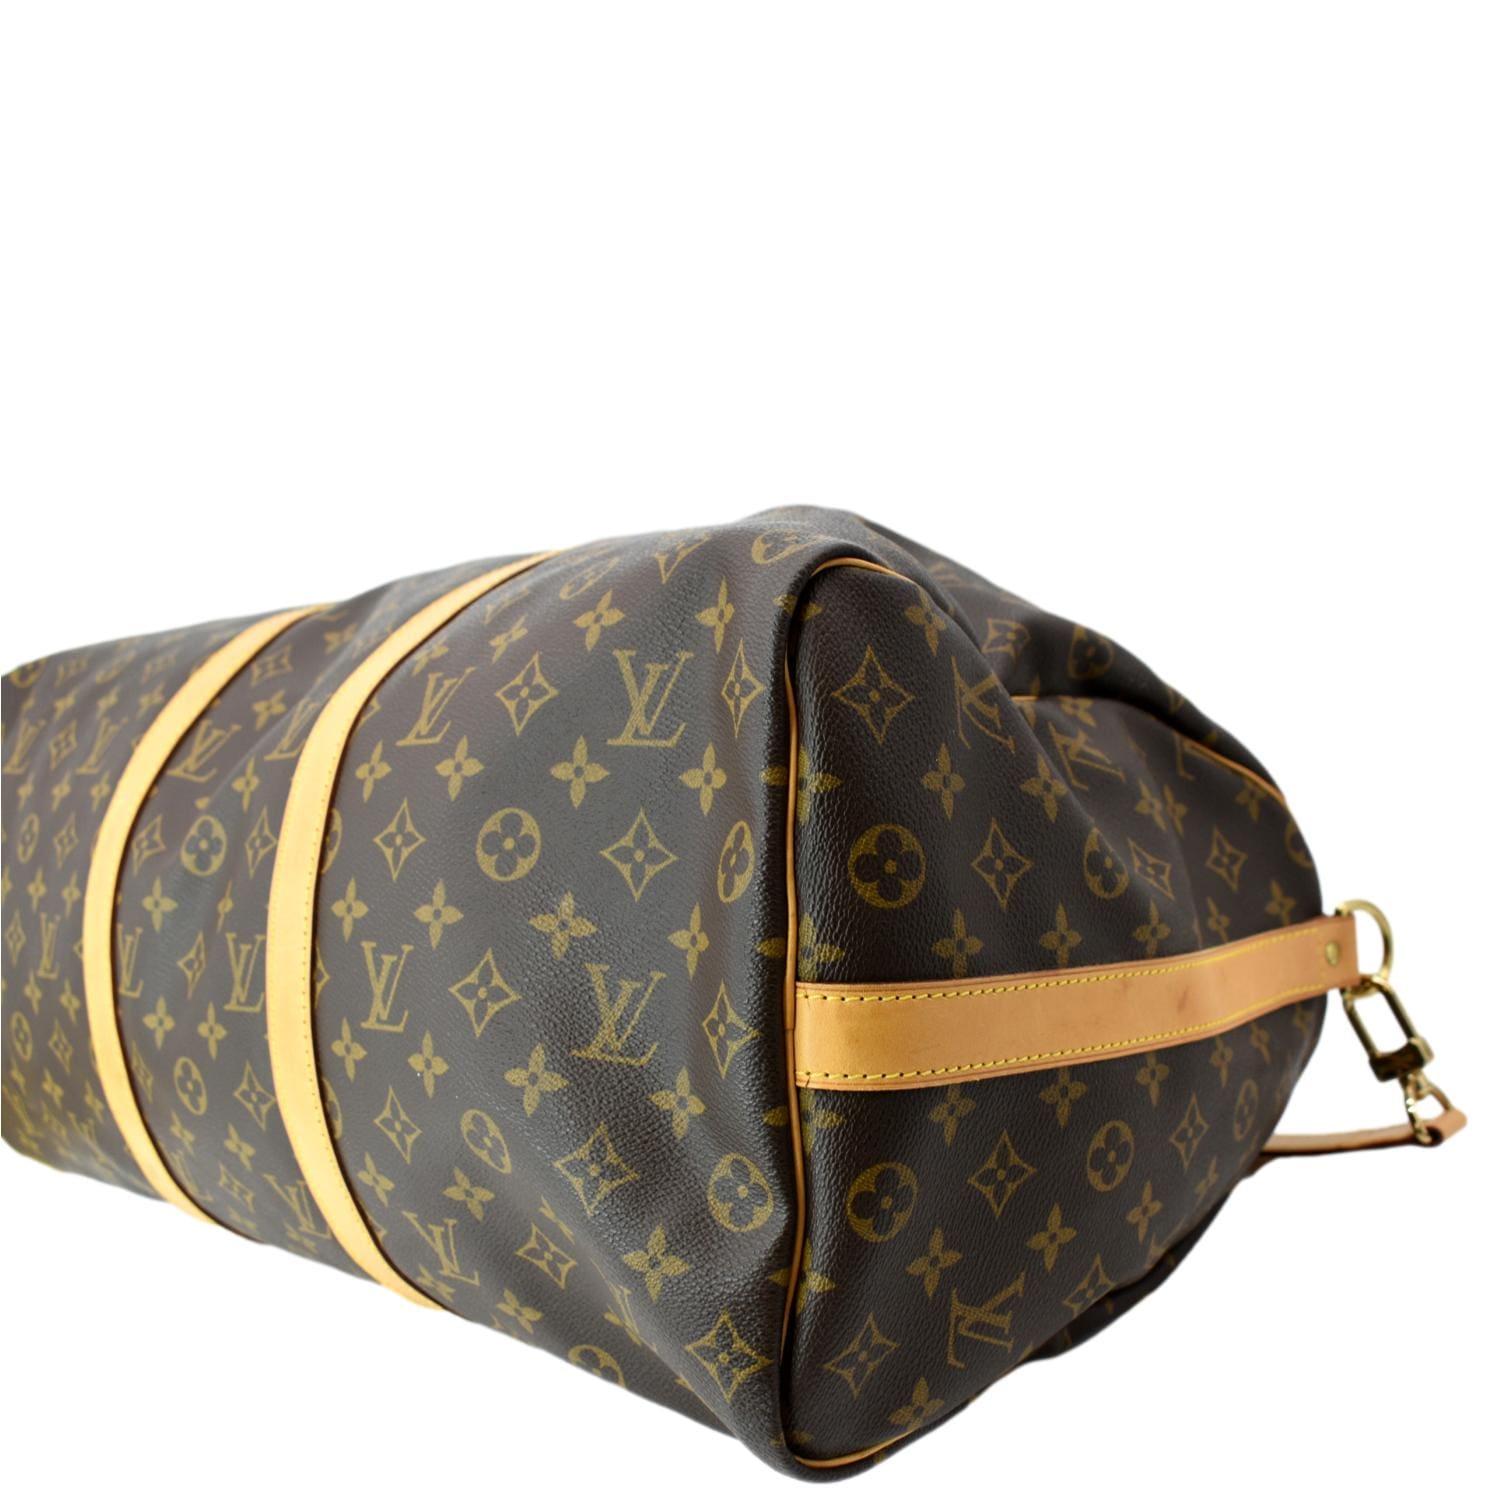 Louis Vuitton Keepall 50 cm Travel Bag in Brown Monogram Canvas and